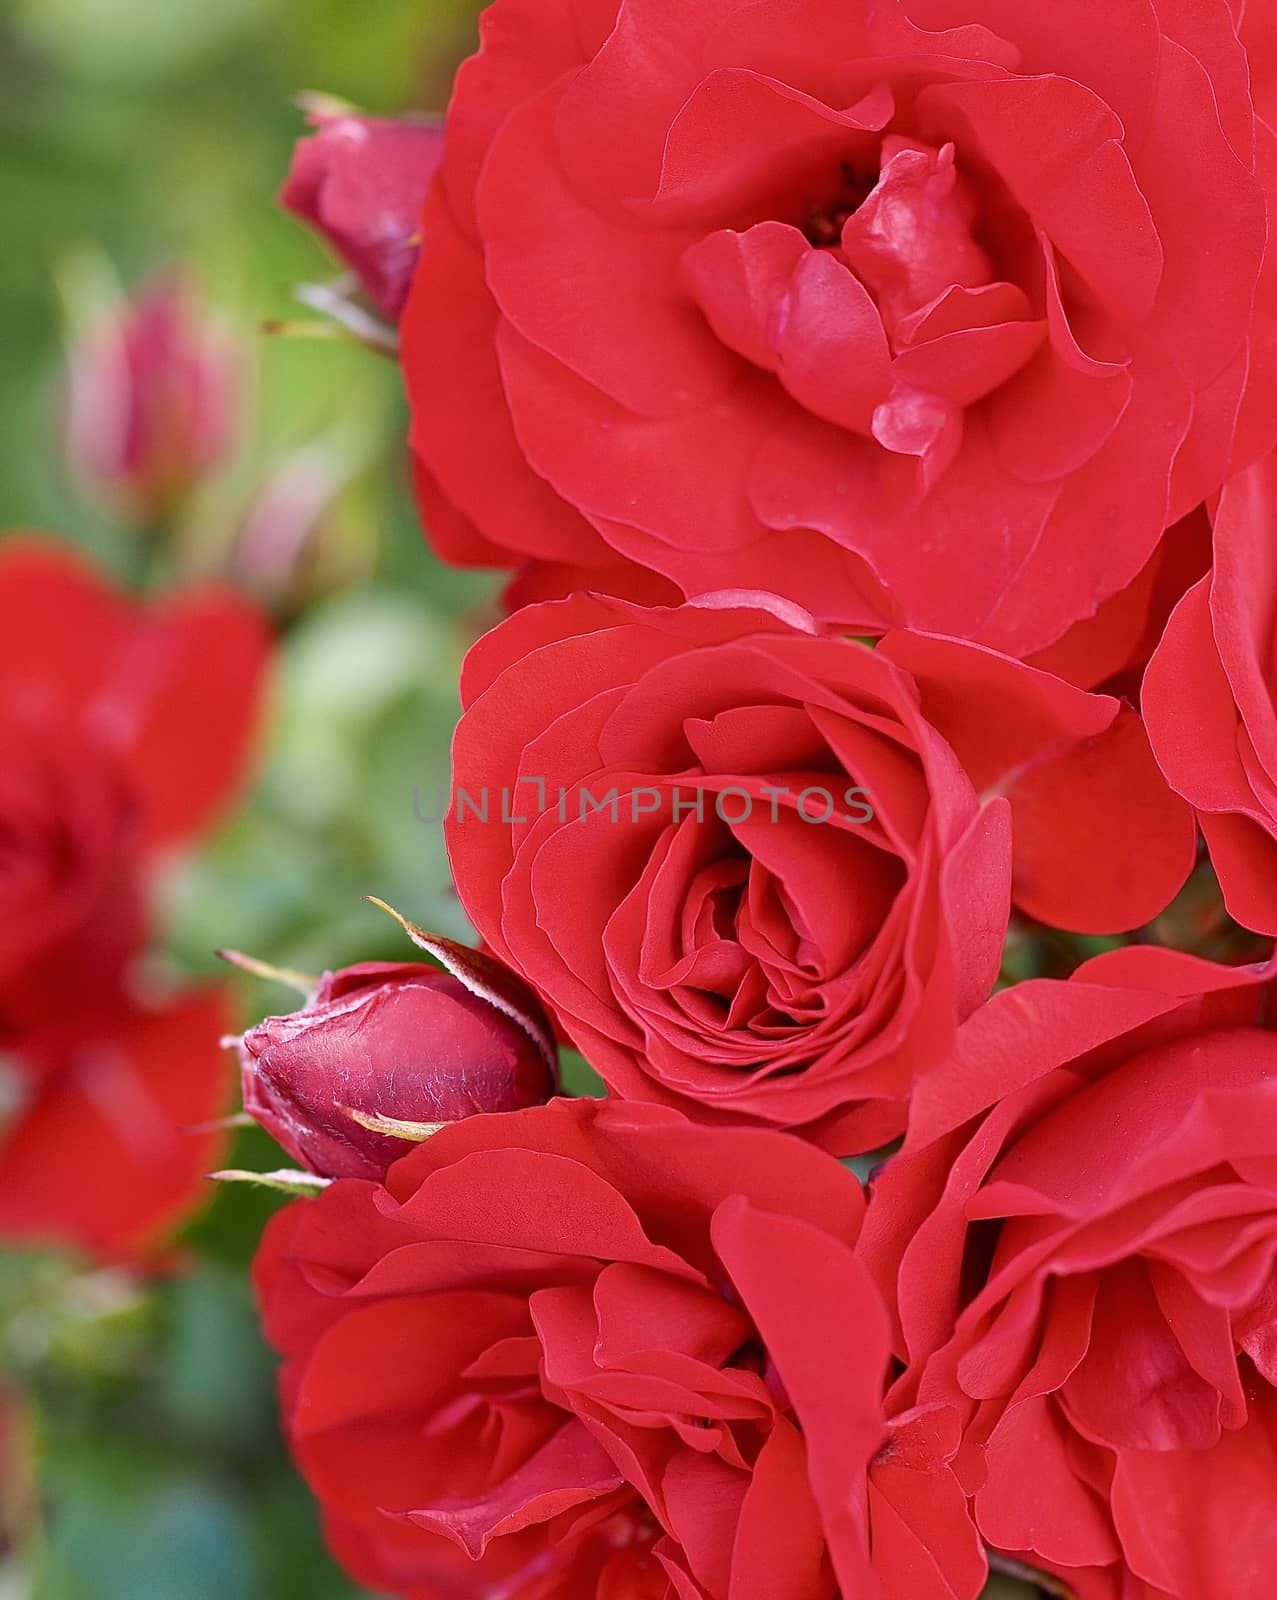 Beautiful red roses blooming in a garden by Stimmungsbilder